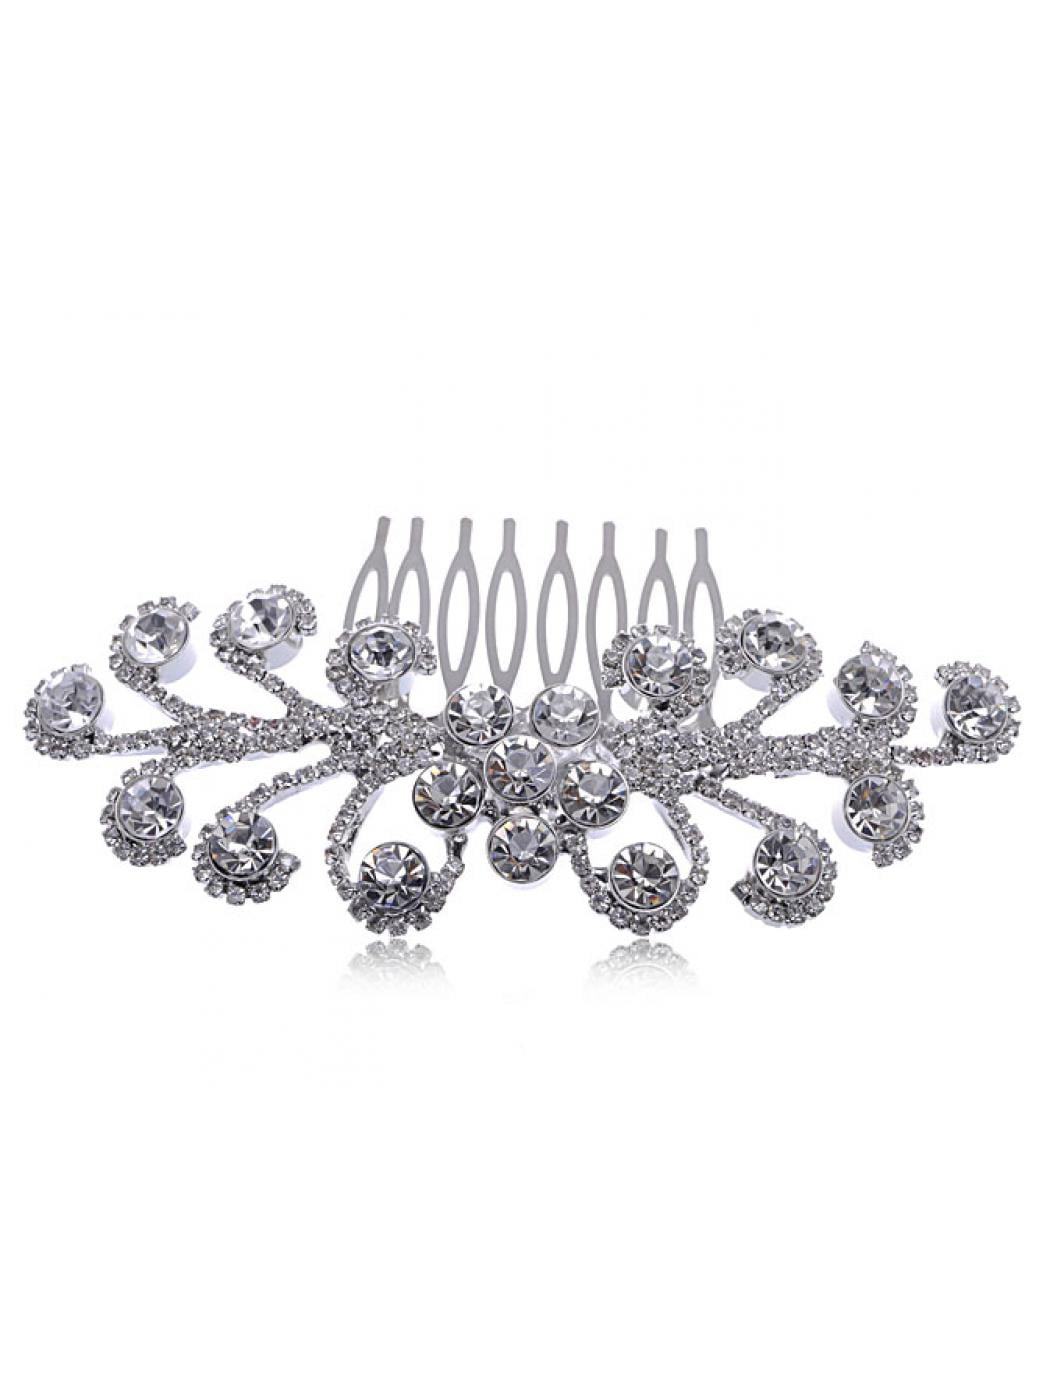 BEAUTIFUL HAIR COMB loaded with crystal fantastic